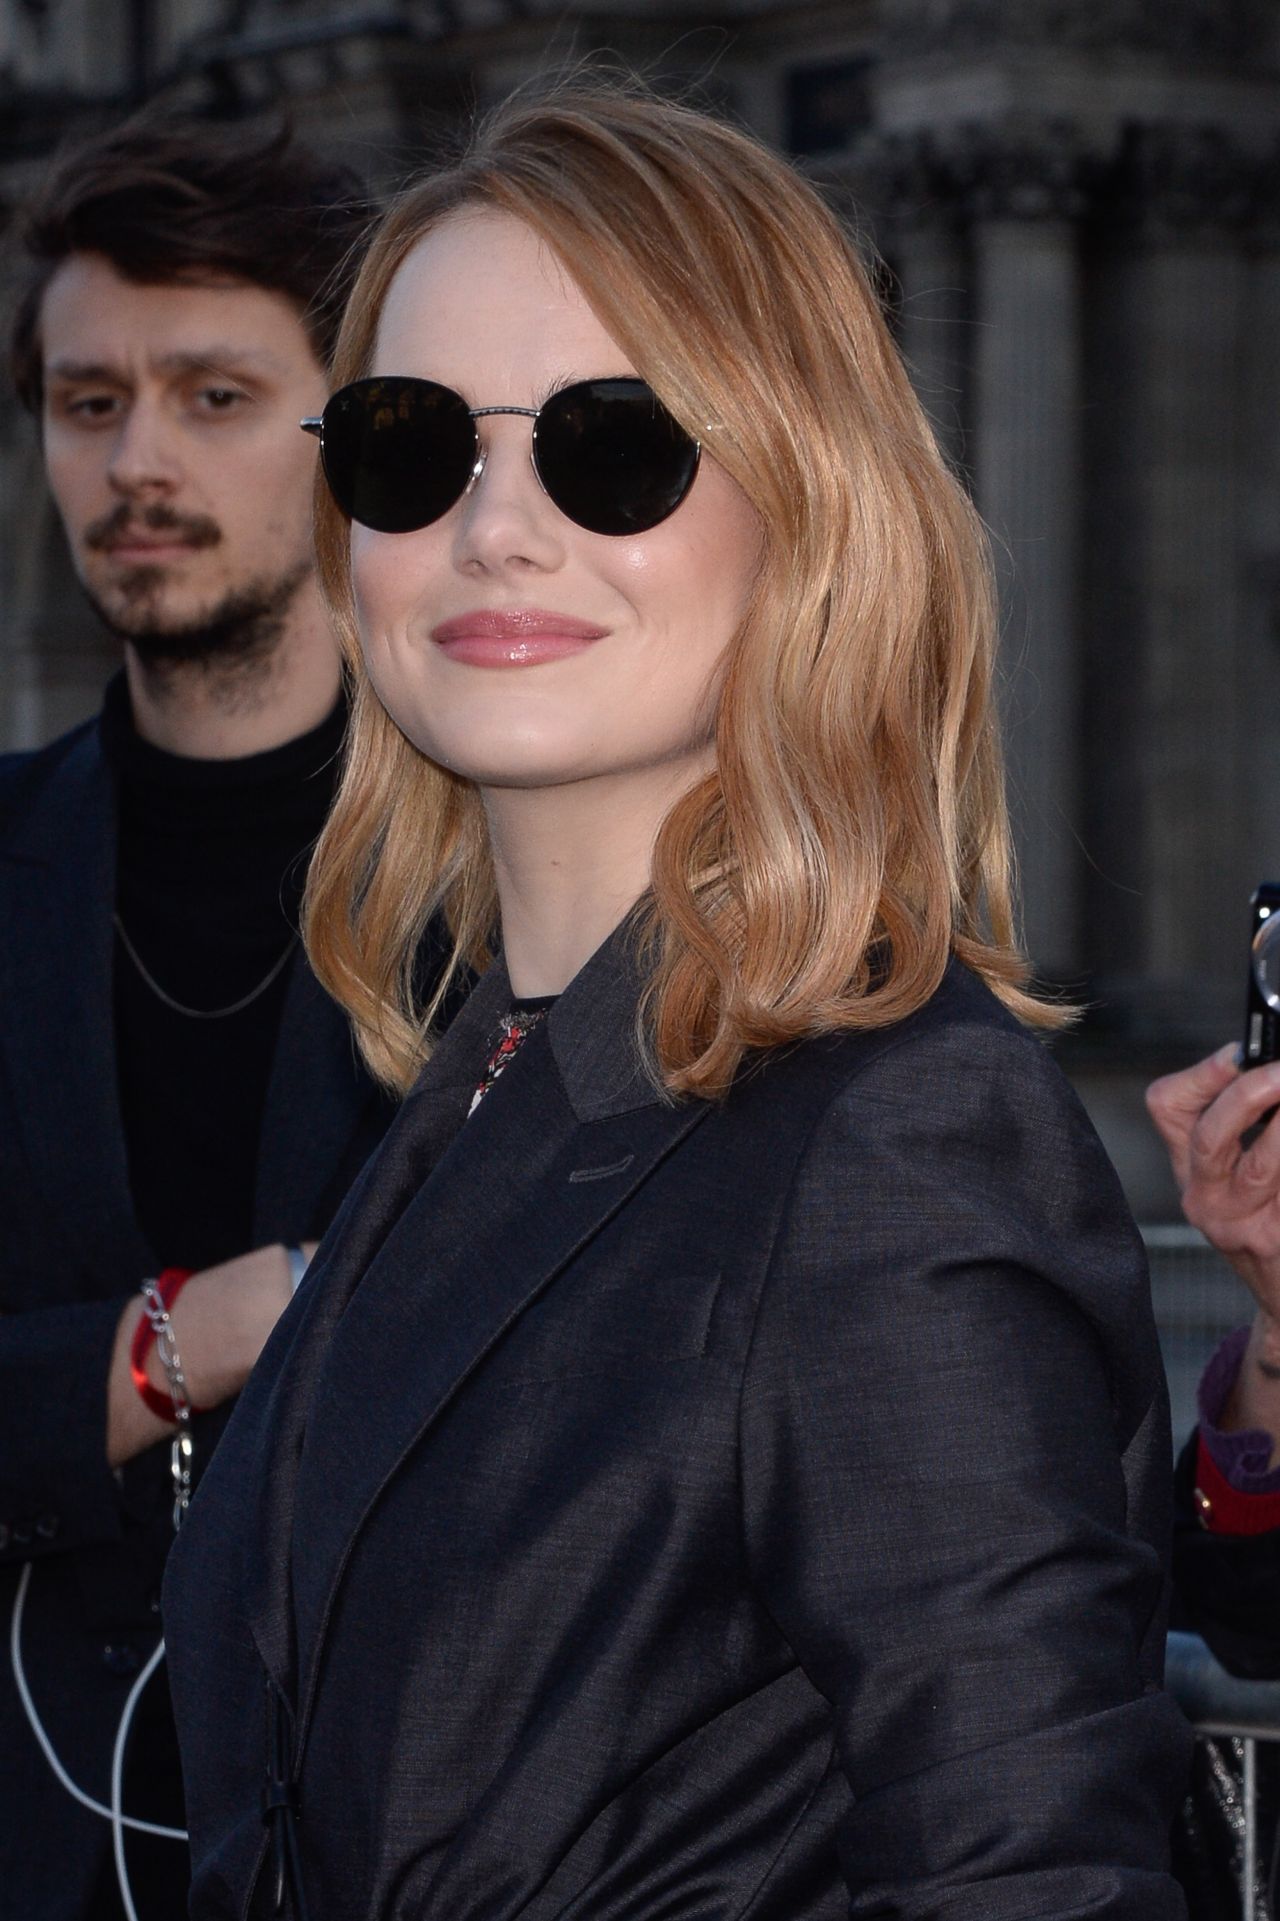 Emma Stone is vacation-ready in chic green top at Louis Vuitton